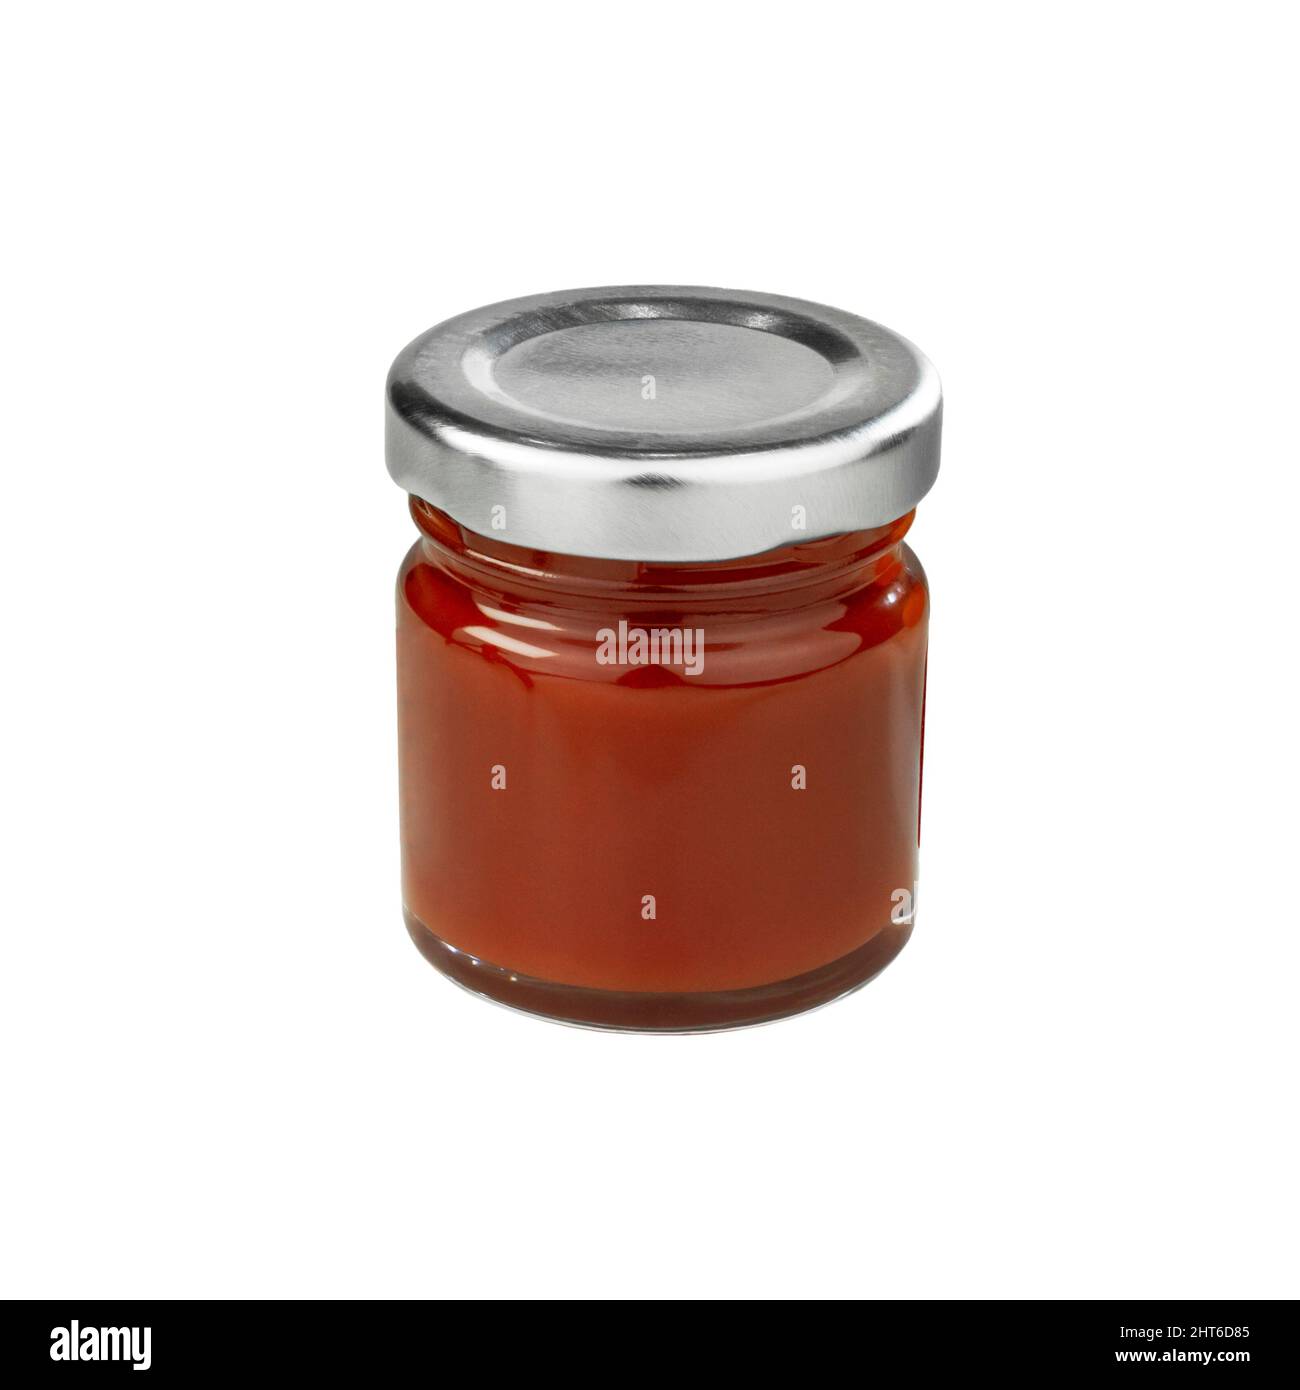 Tomato sauce jar, Glass jar with metal lid isolated on white background with clipping path Stock Photo